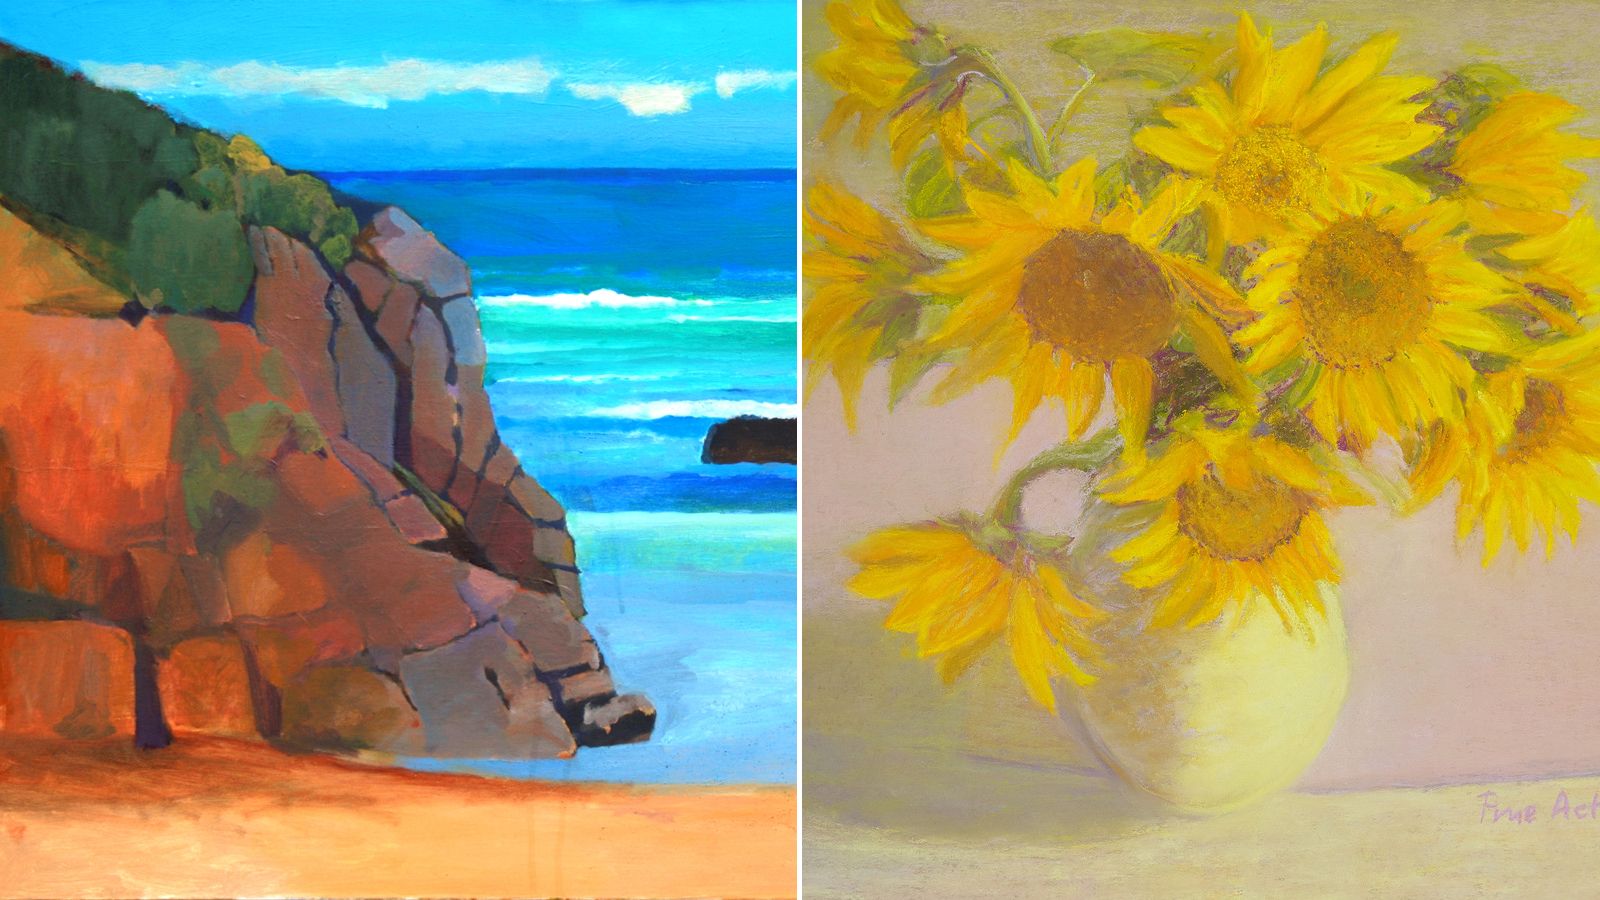 Painting by Merv Moriarty and pastel drawing by Prue Acton. banner image